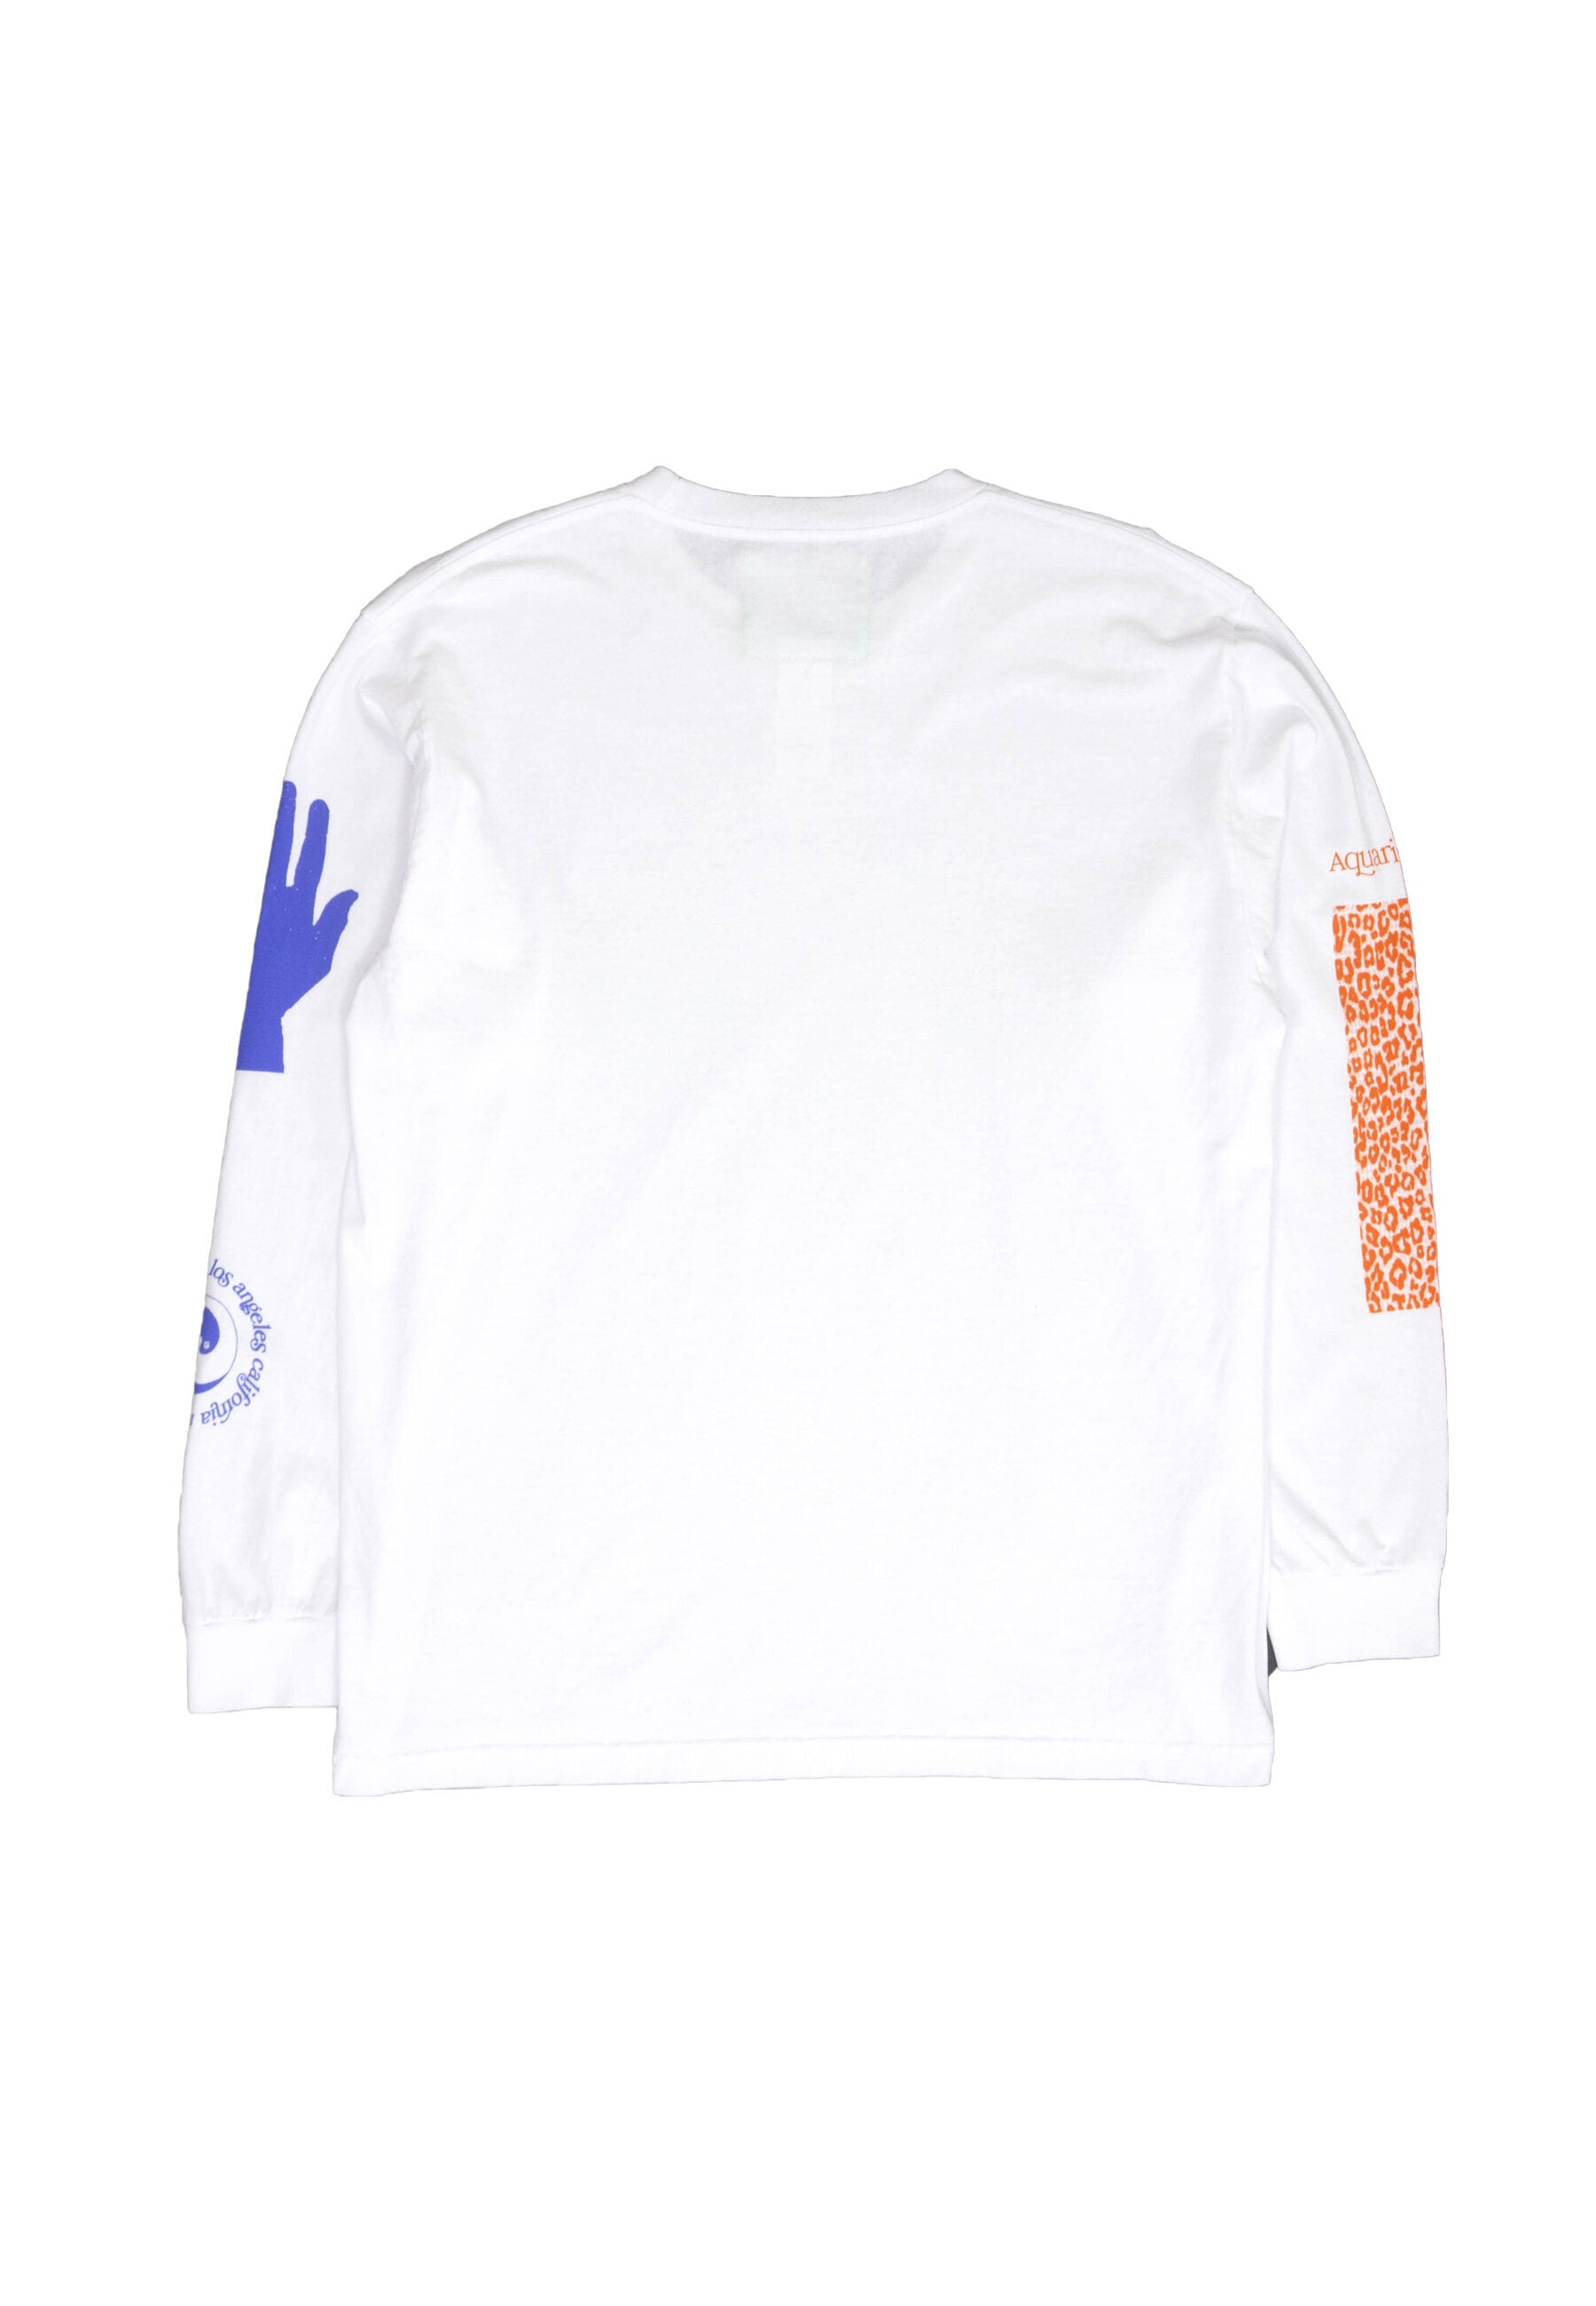 Aquarian Collage L/S Tee - White-Mister Green-Mister Green